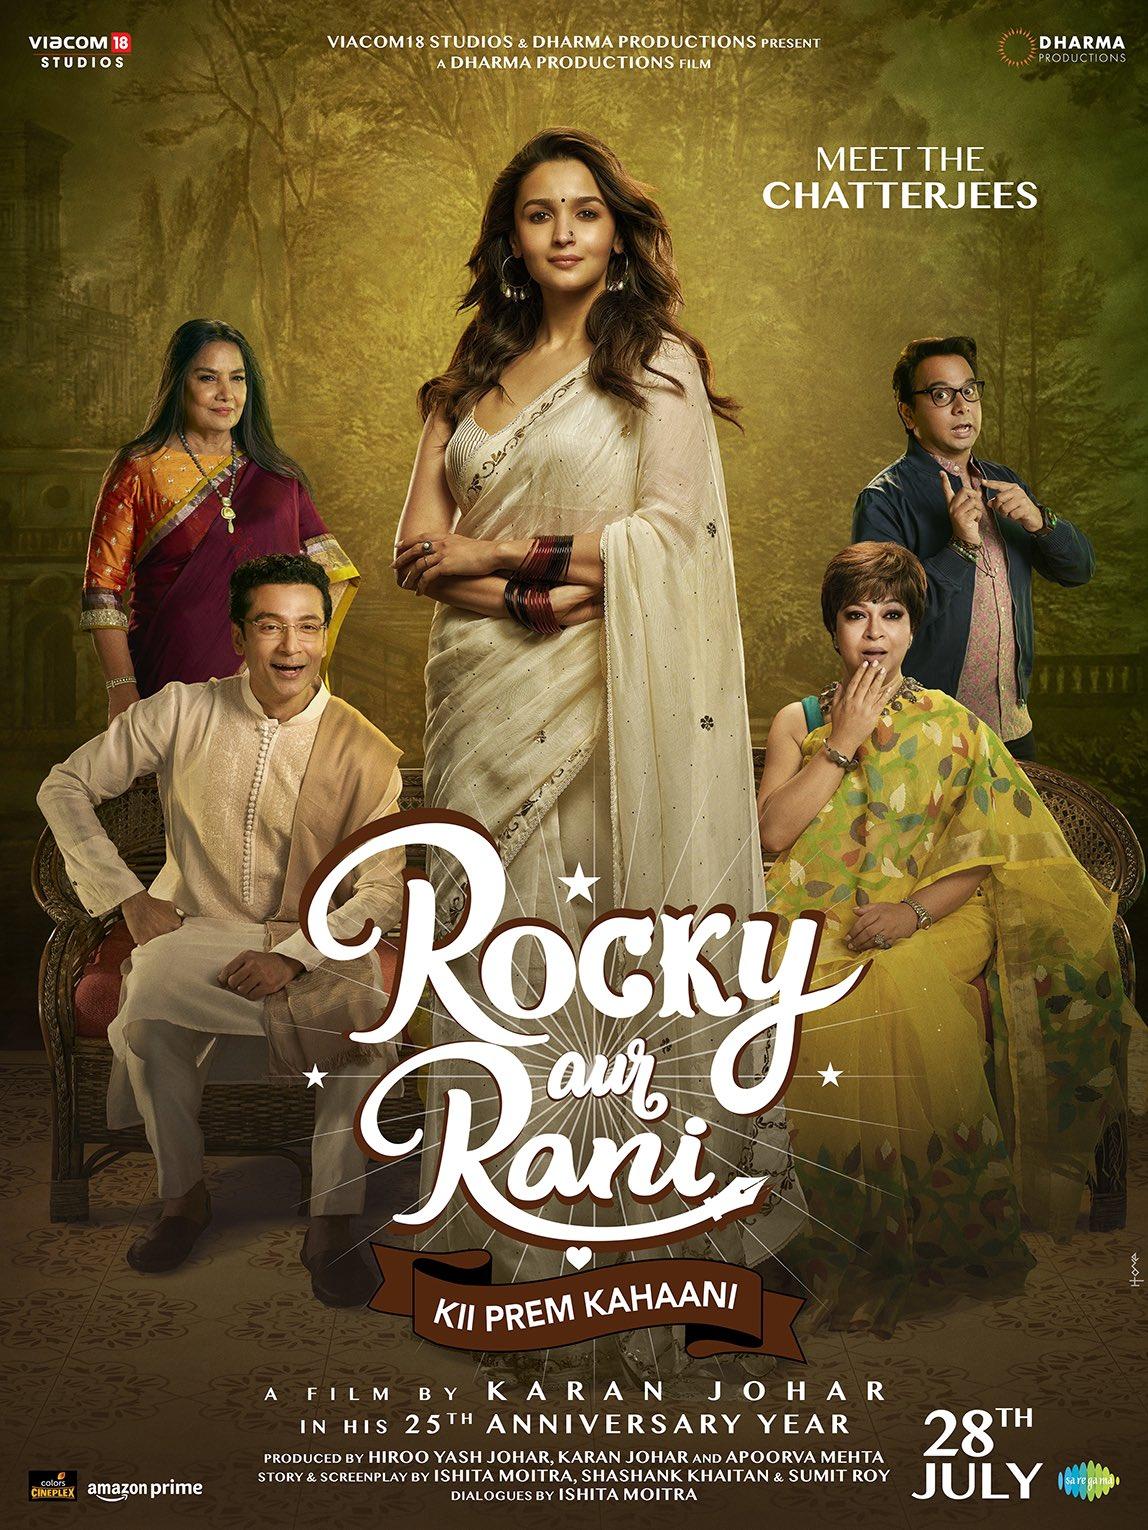 Rocky Aur Rani Kii Prem Kahaani- Flamboyant Punjabi Rocky and intellectual Bengali journalist Rani fall in love despite their differences. After facing family opposition, they decide to live with each other's families for three months before getting married.
Rating- 7.2